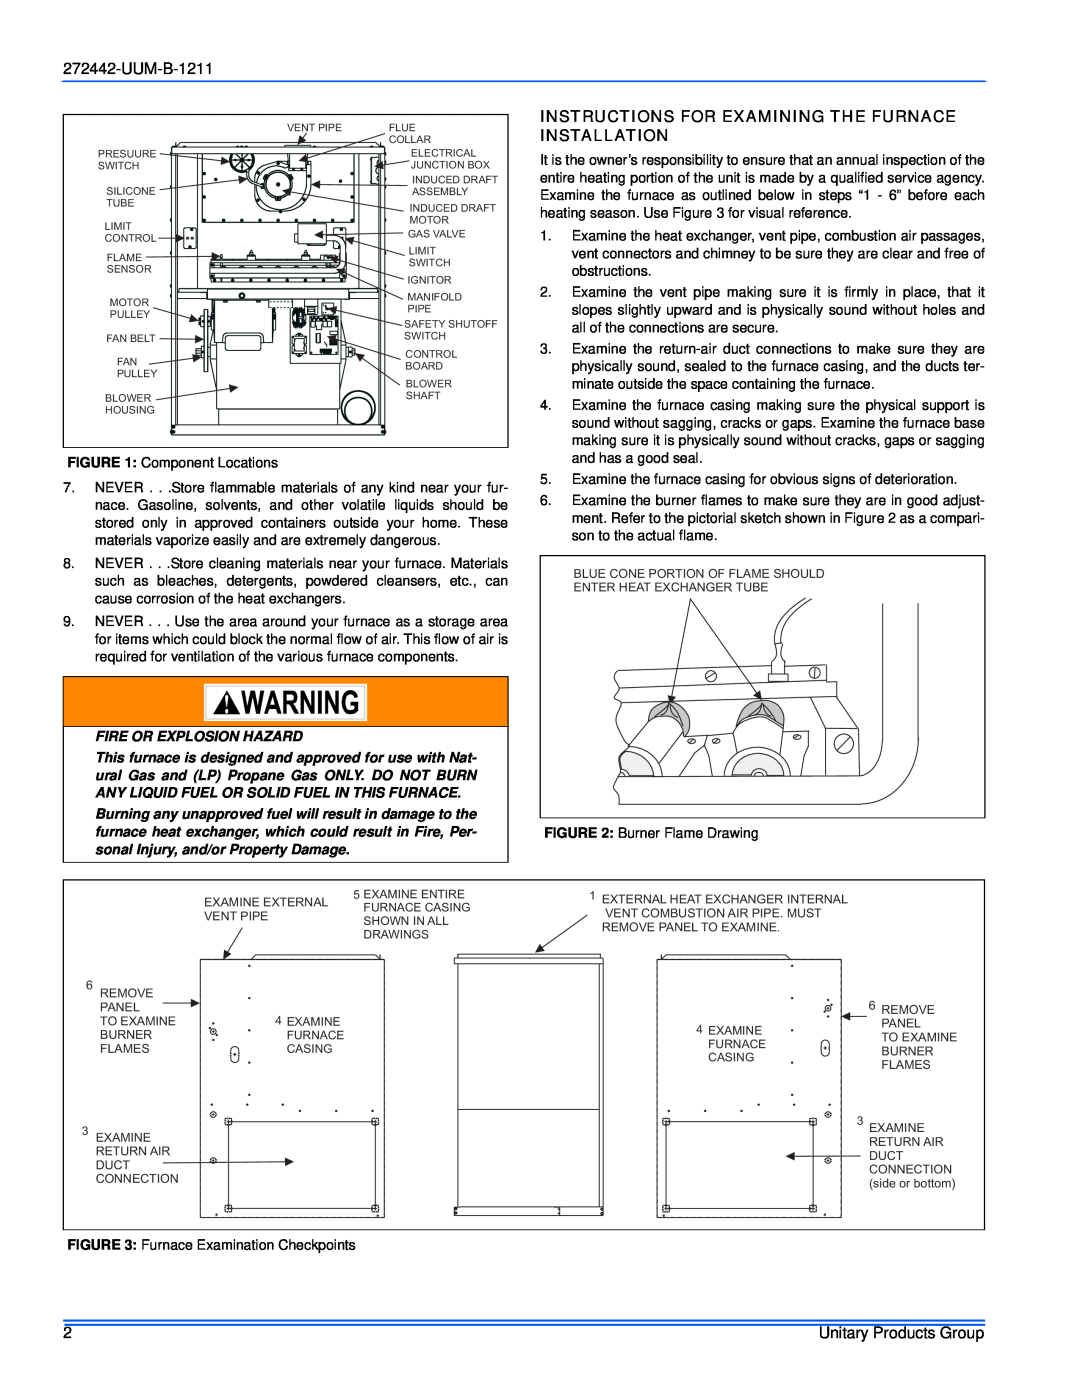 York GY8S160E30UH21 service manual UUM-B-1211, Instructions For Examining The Furnace, Installation 